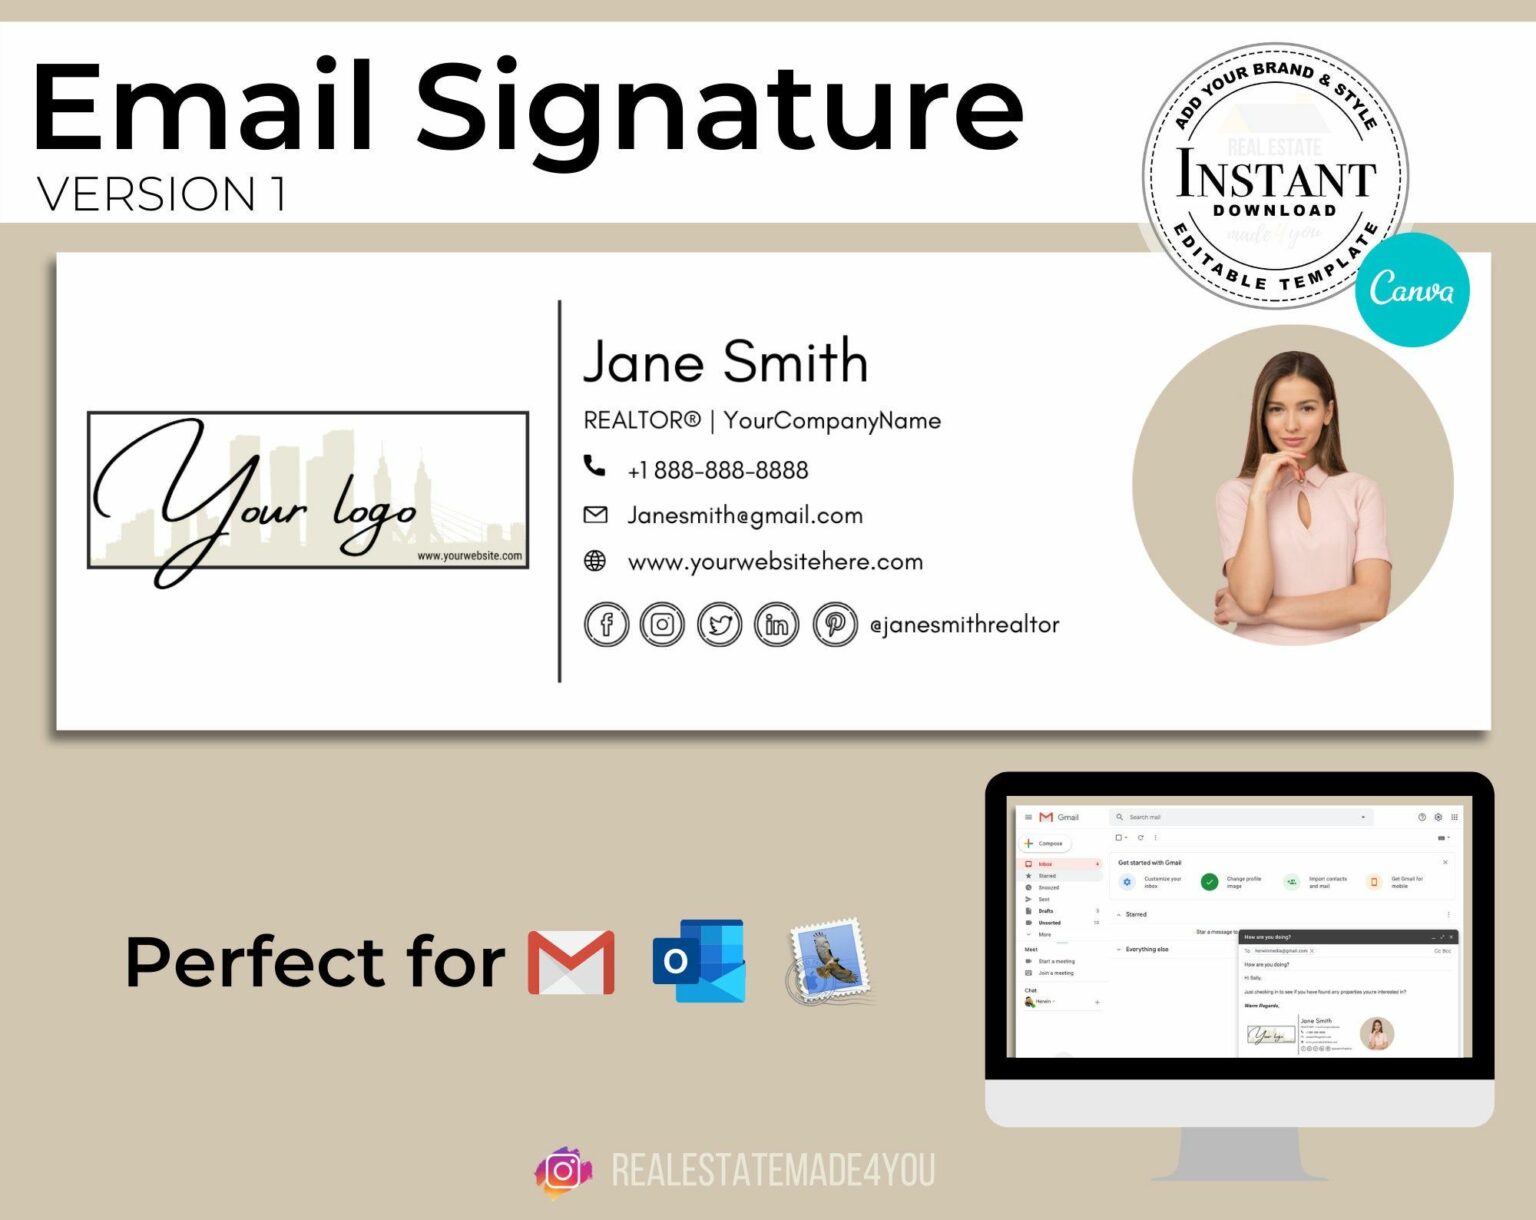 how to add logo to email signature in outlook